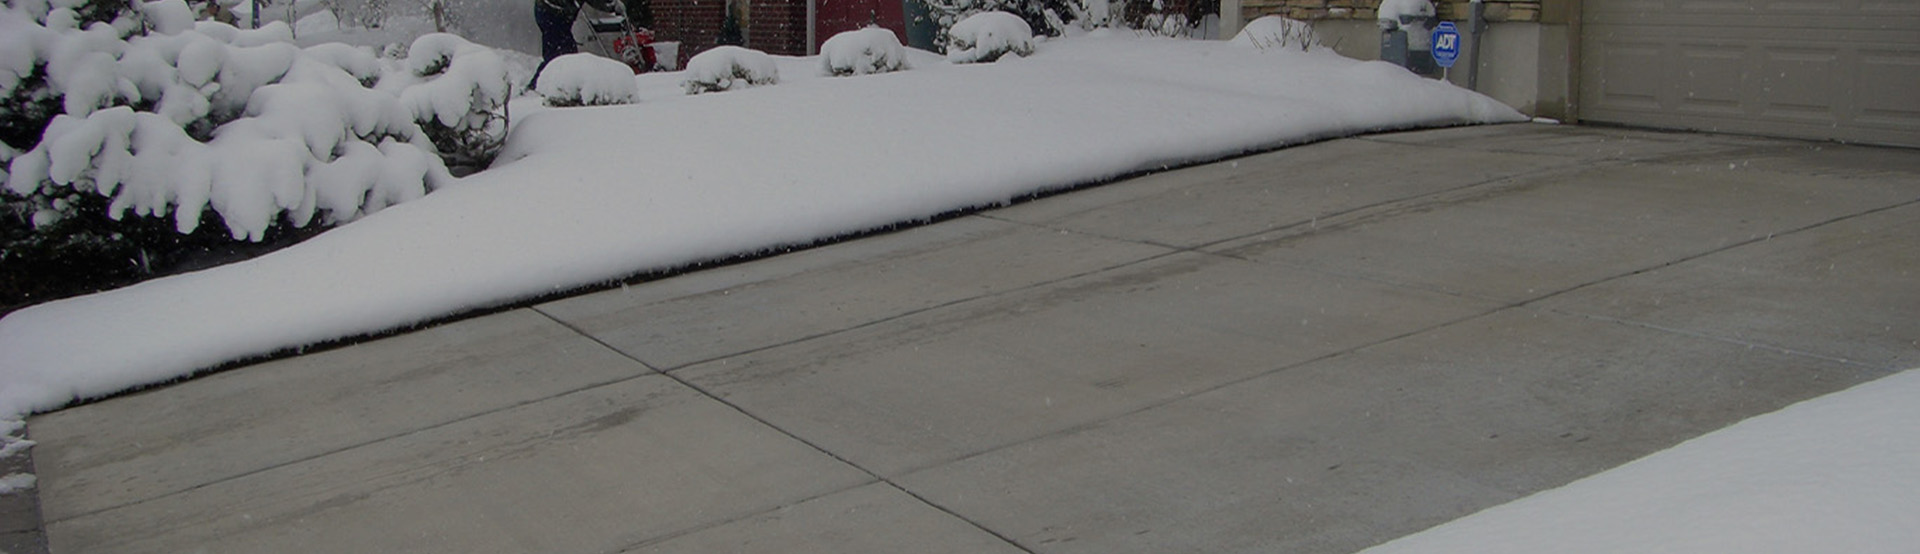 The benefits of heated driveways and snow melting systems banner